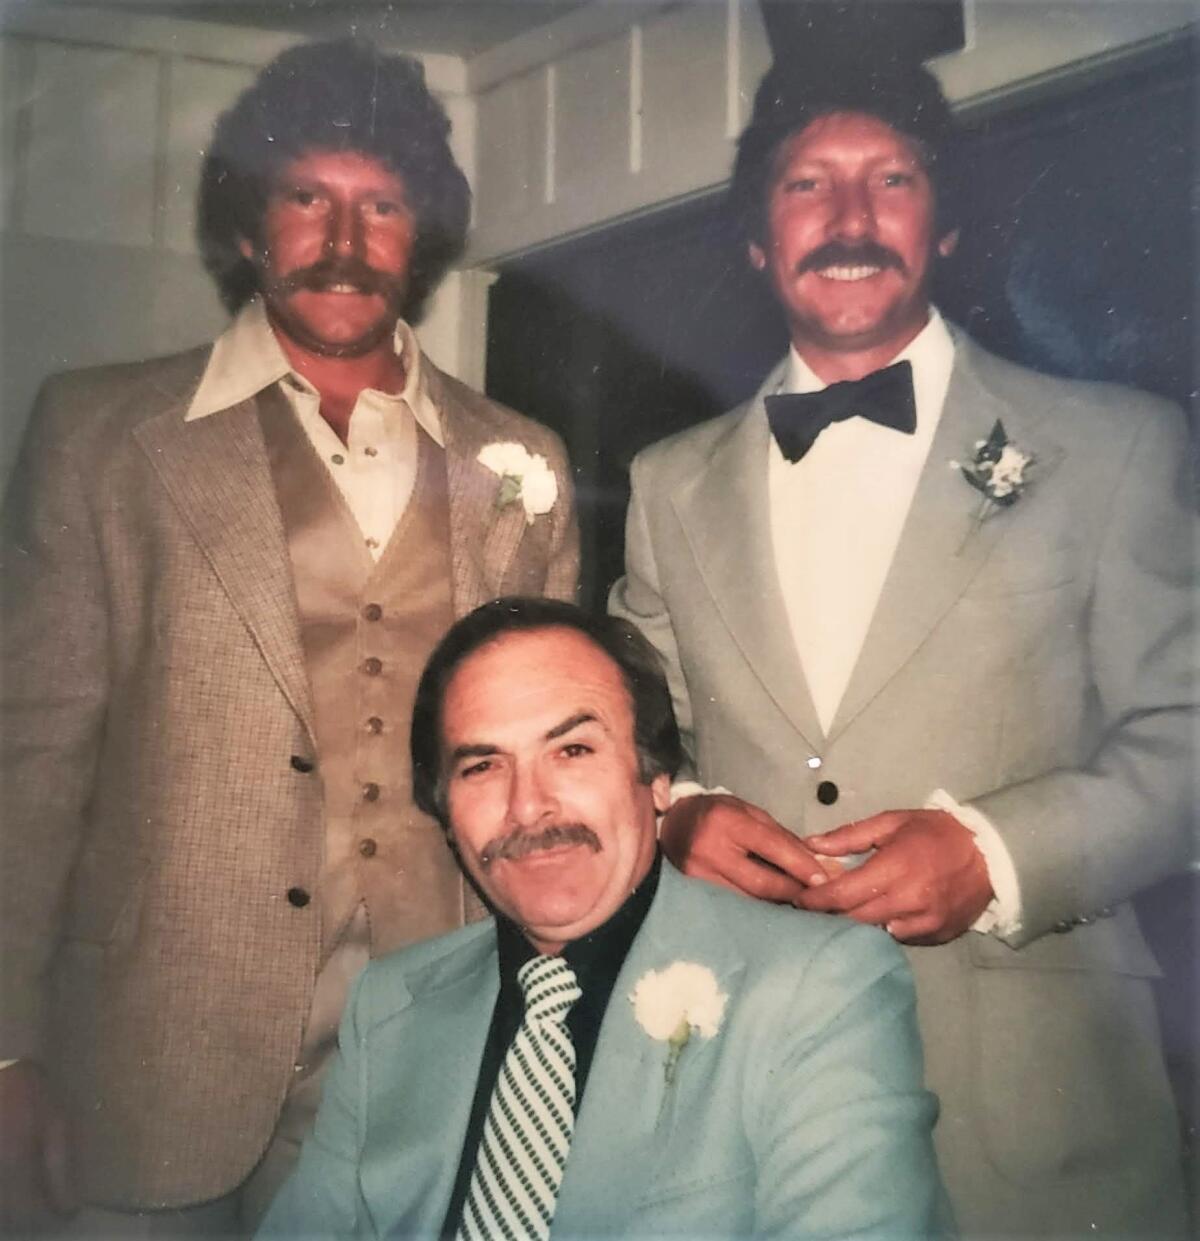 Brothers Bob (left) and Rick Sorben (right) with older brother Harold Sweet